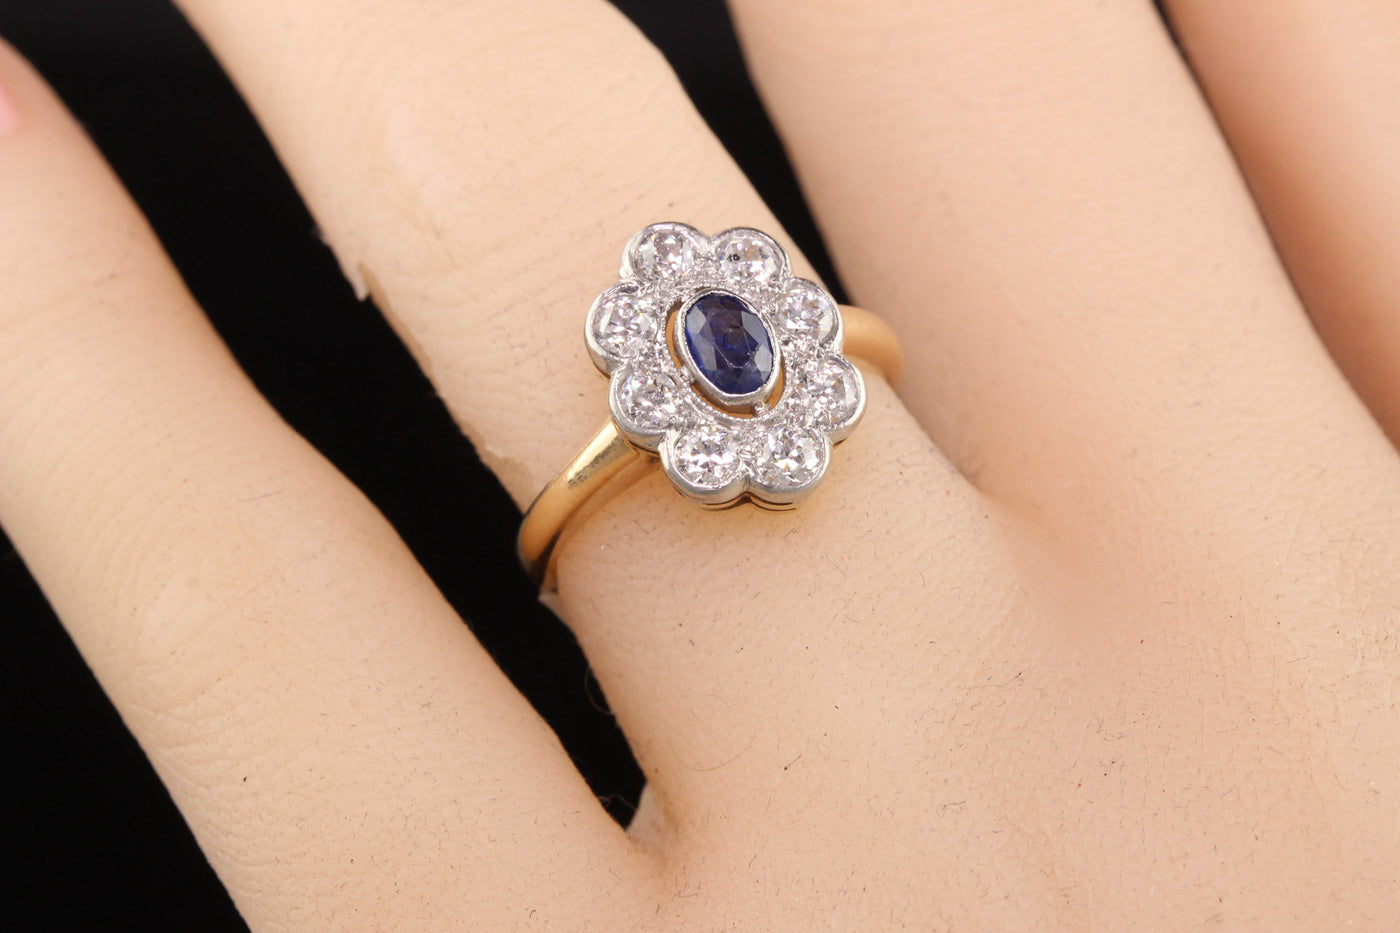 Antique Art Deco 14K Yellow Gold and Platinum Old Euro Diamond and Sapphire Ring